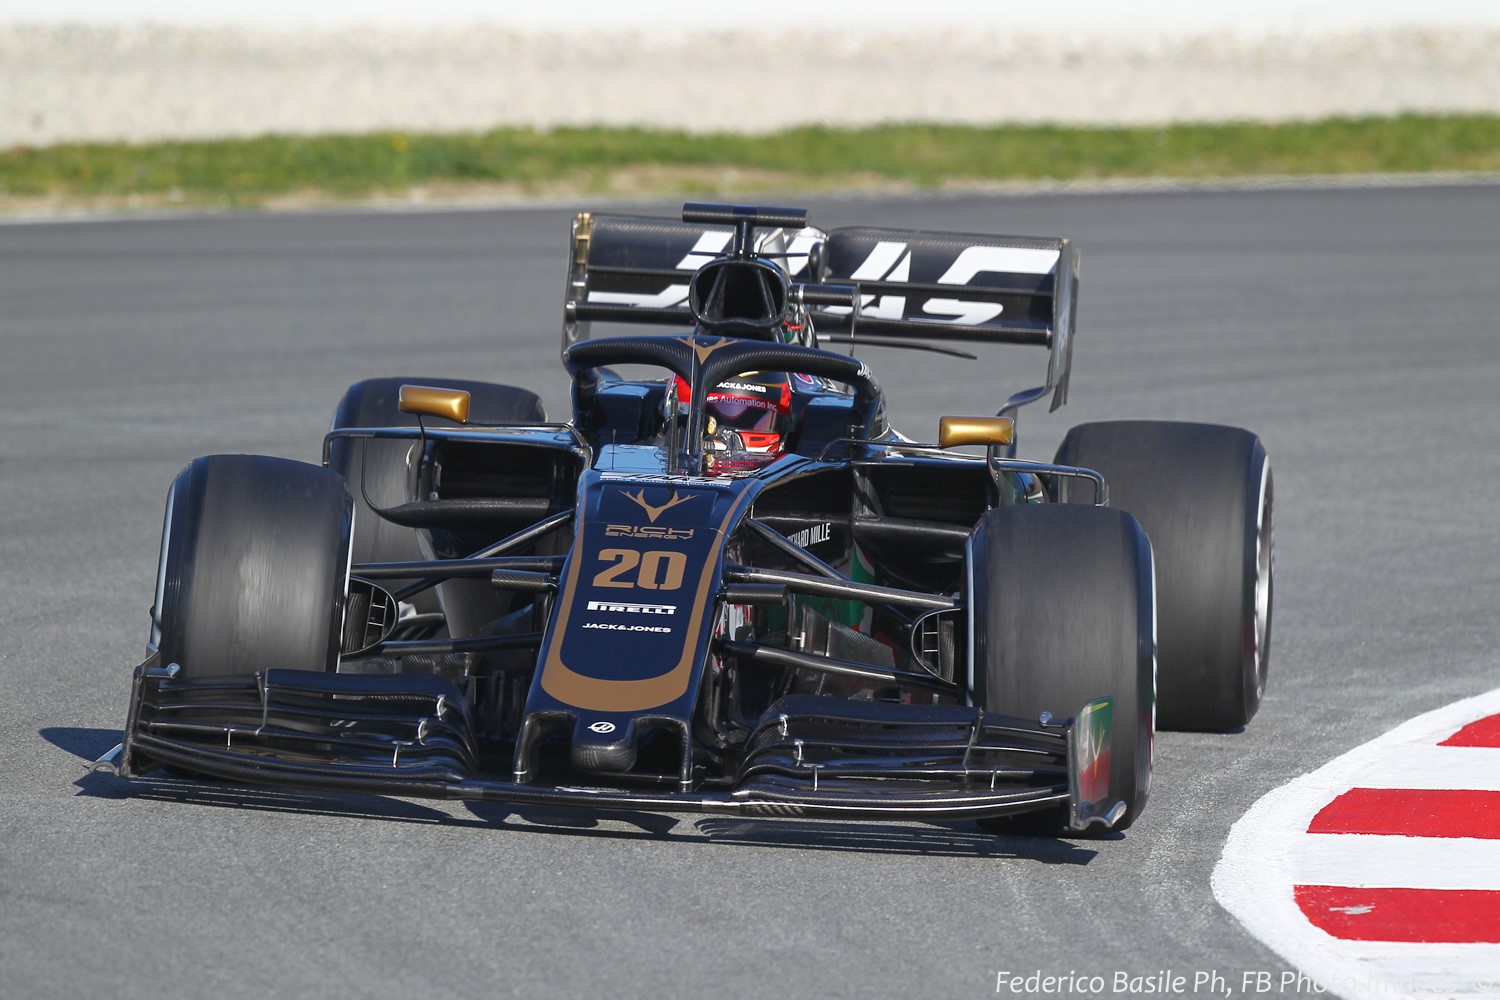 Magnussen testing on Tuesday in Barcelona